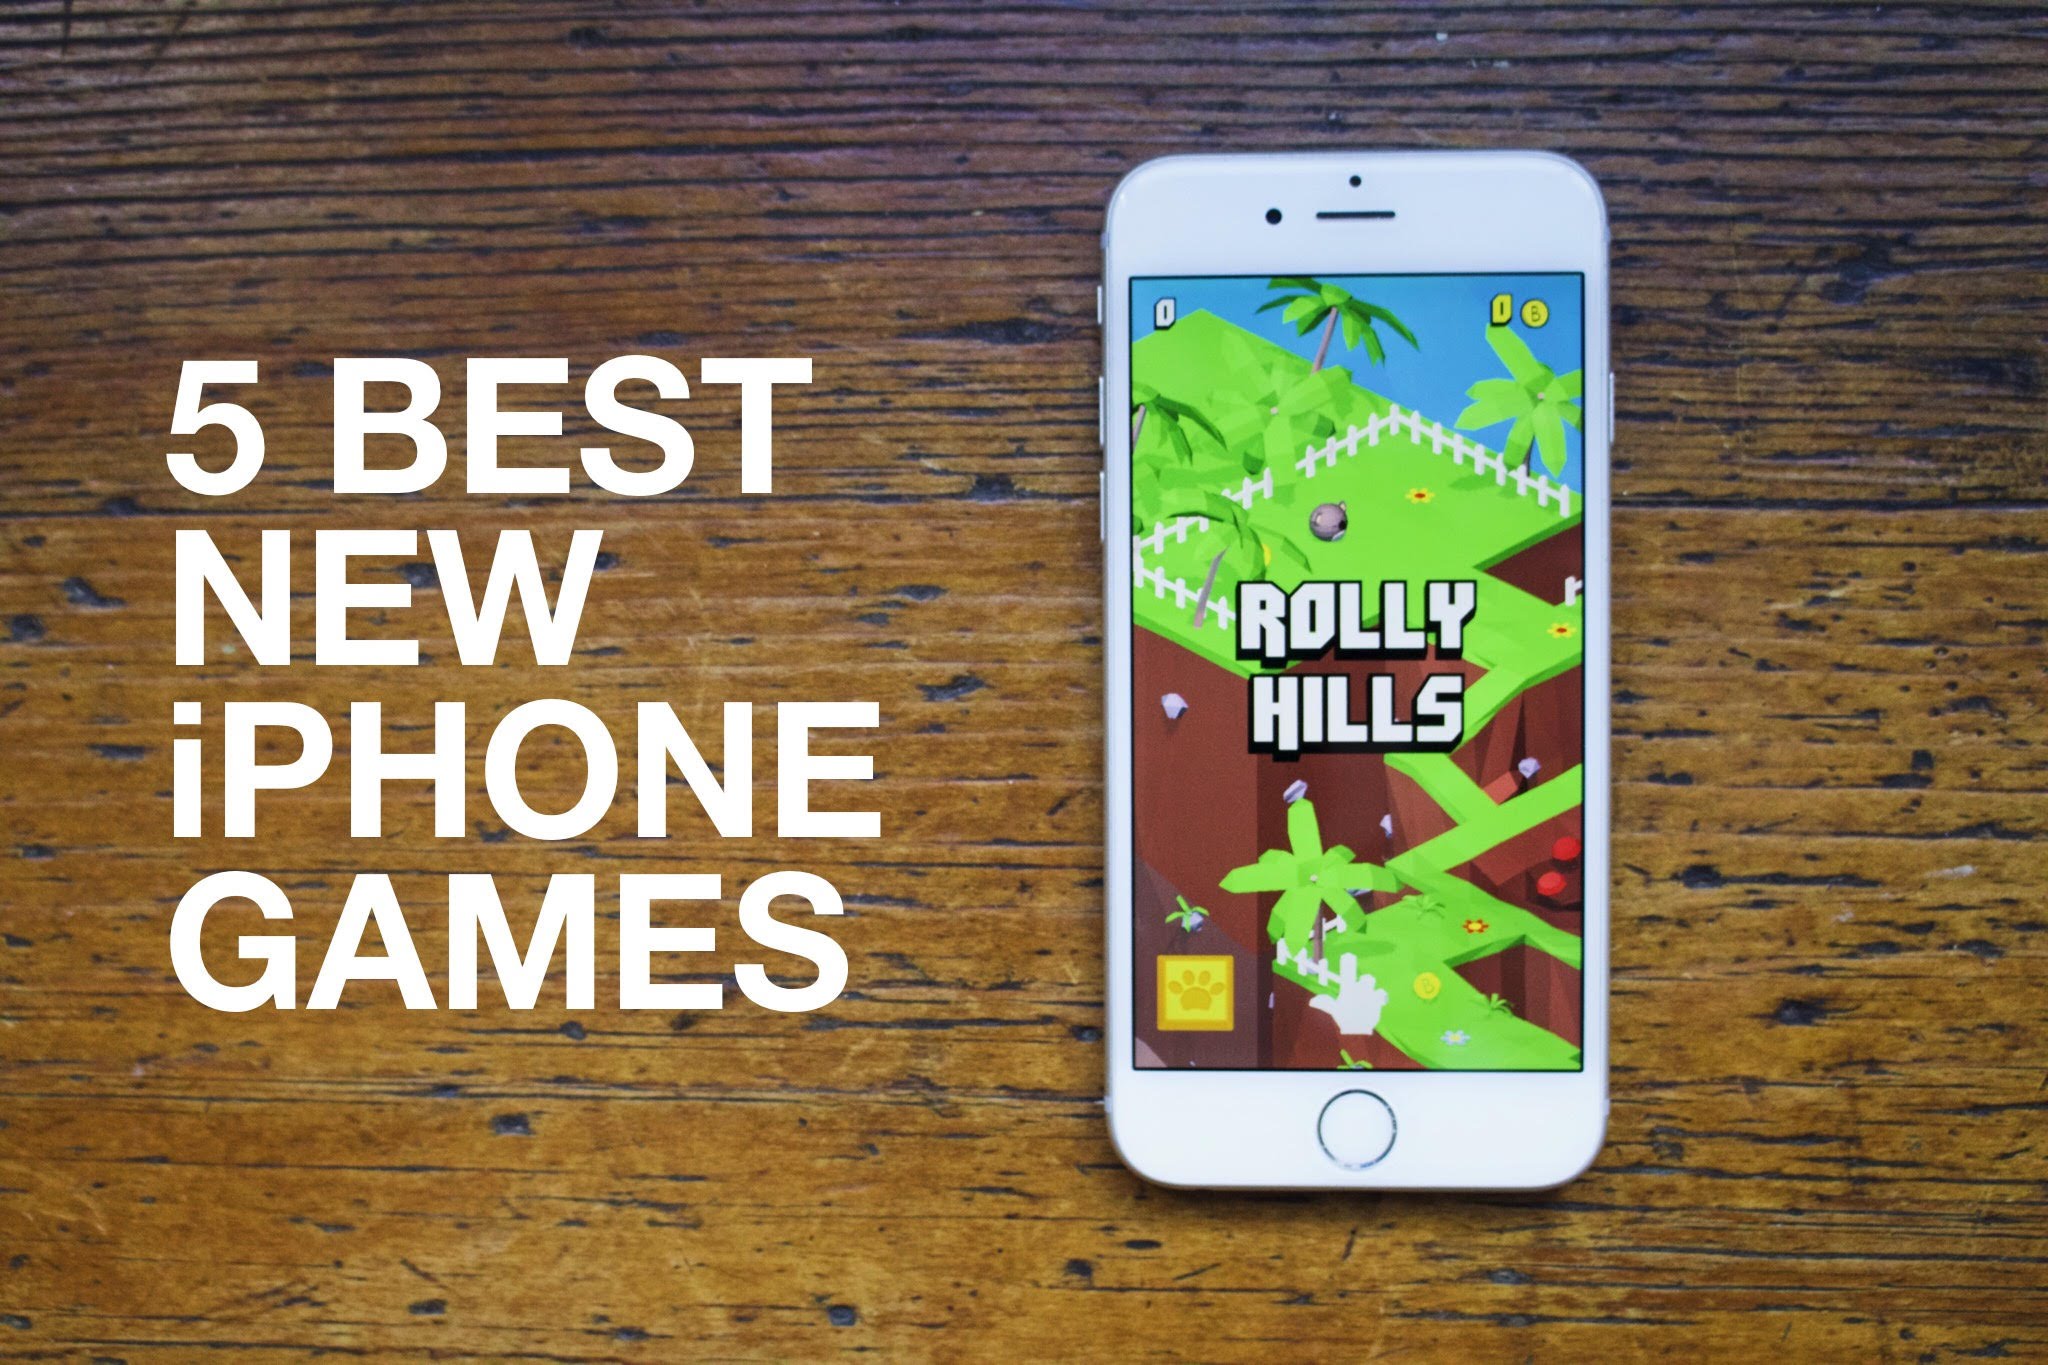 The 5 Best iPhone Game Apps